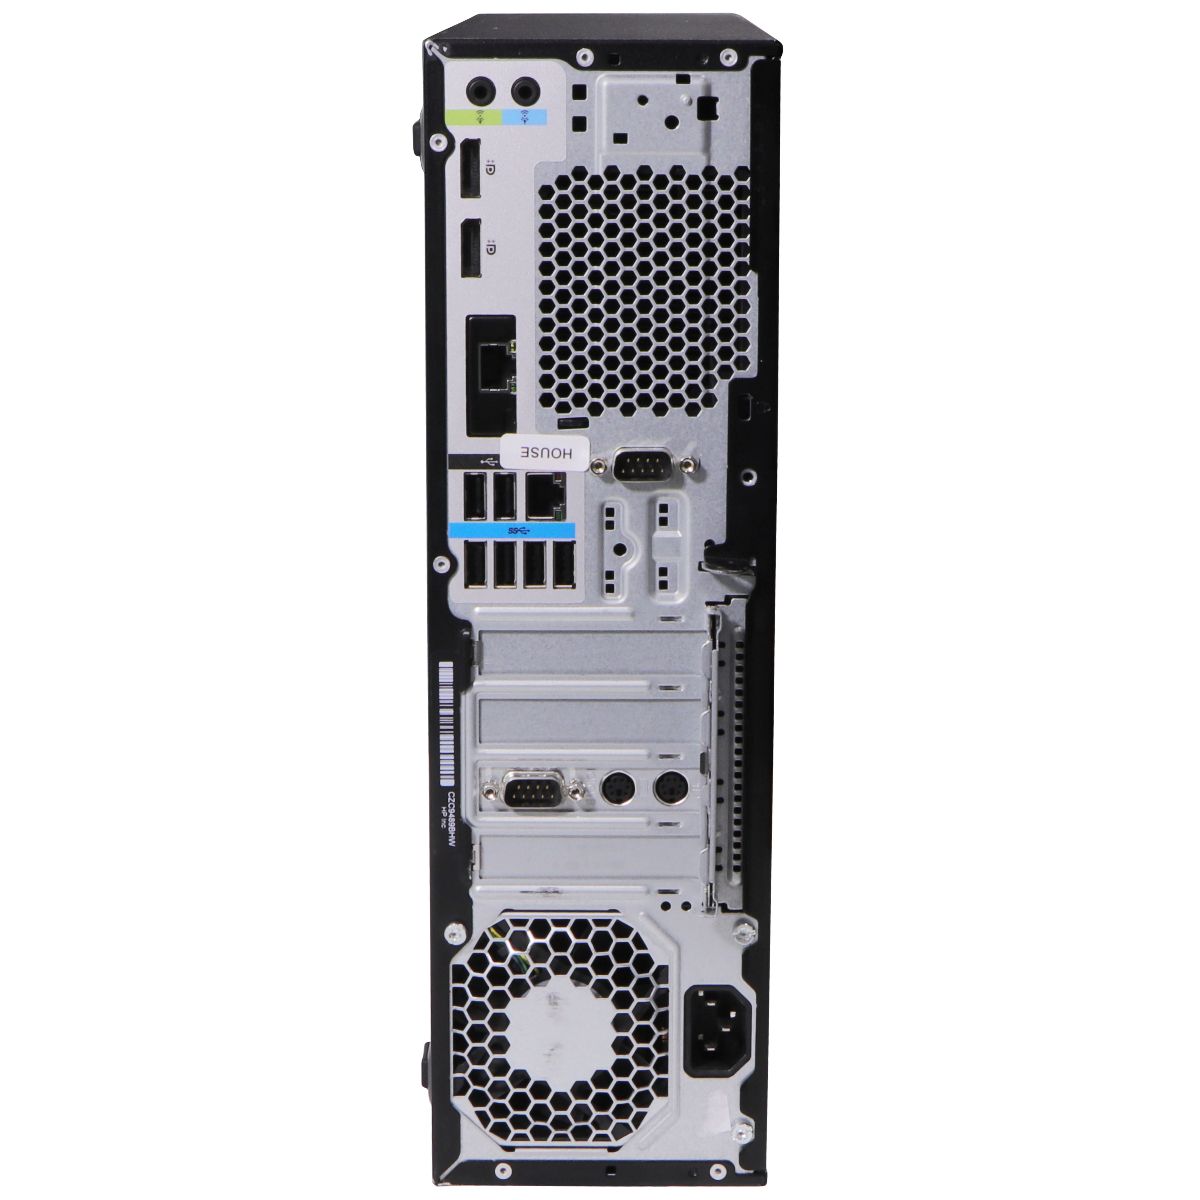 HP Z2 SFF G4 Workstation (F113-SF-250C) Intel i5-8500/500GB HDD/8GB/Win 10 Home PC Desktops & All-In-Ones HP    - Simple Cell Bulk Wholesale Pricing - USA Seller